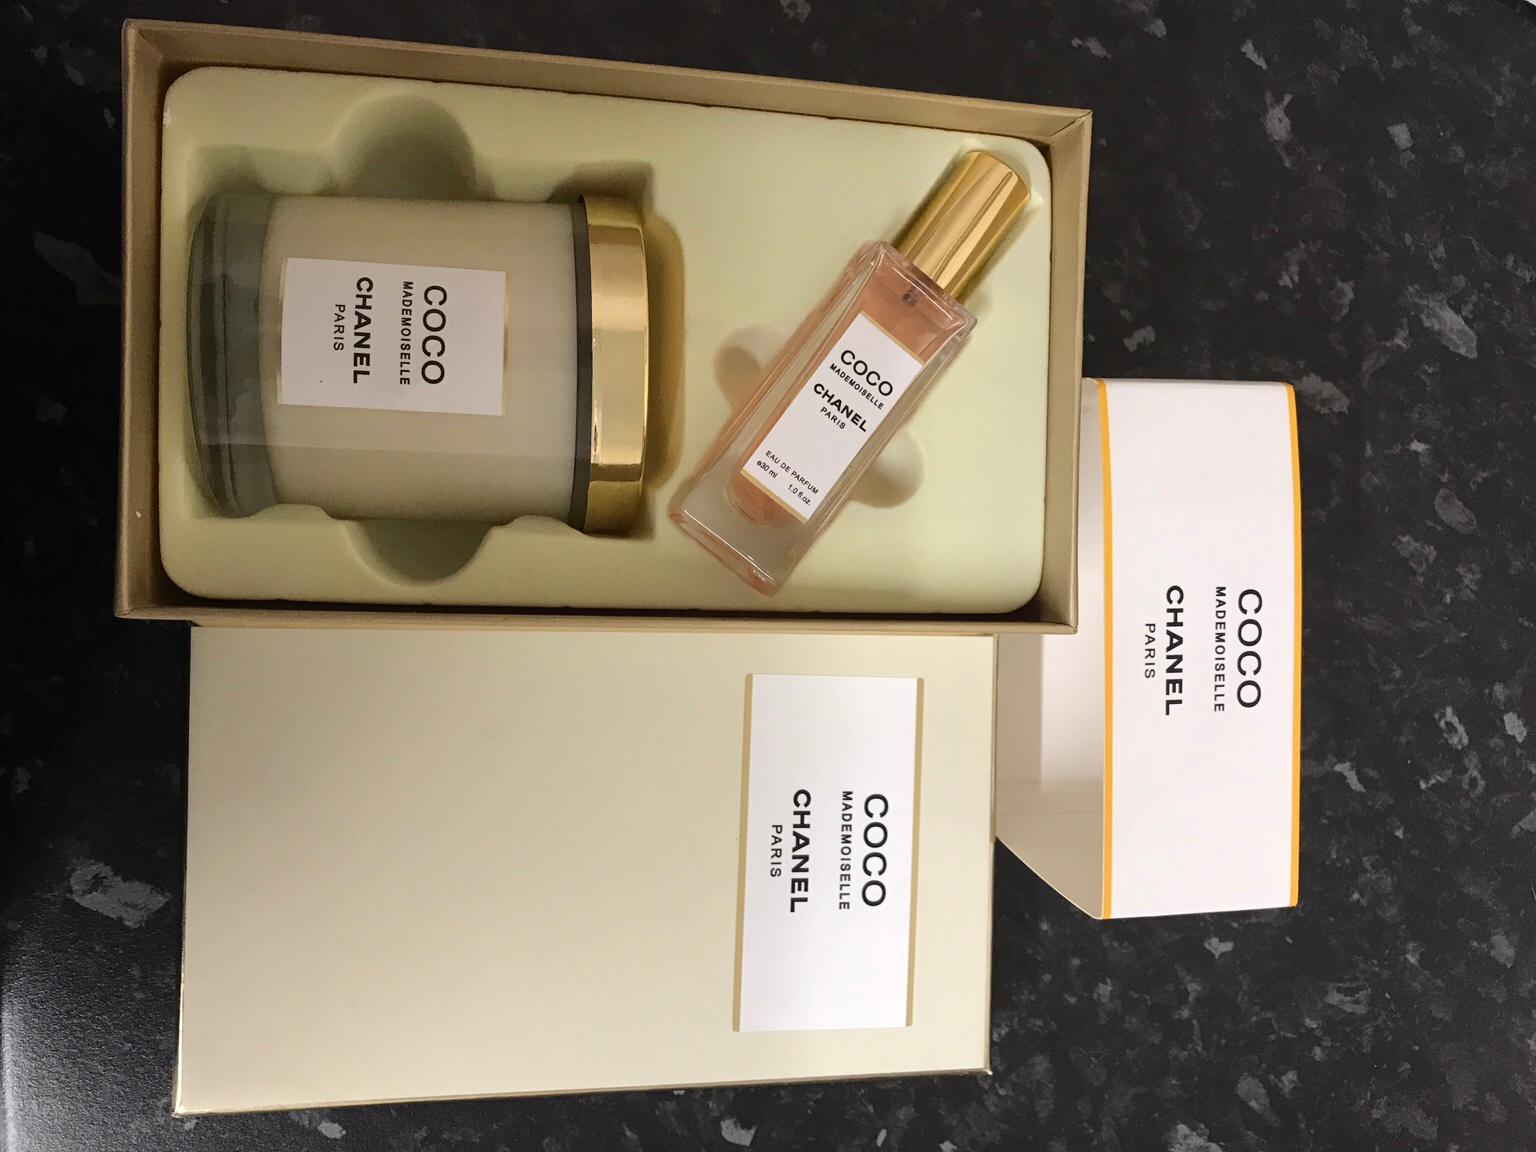 Coco Chanel perfume and candle gift set 